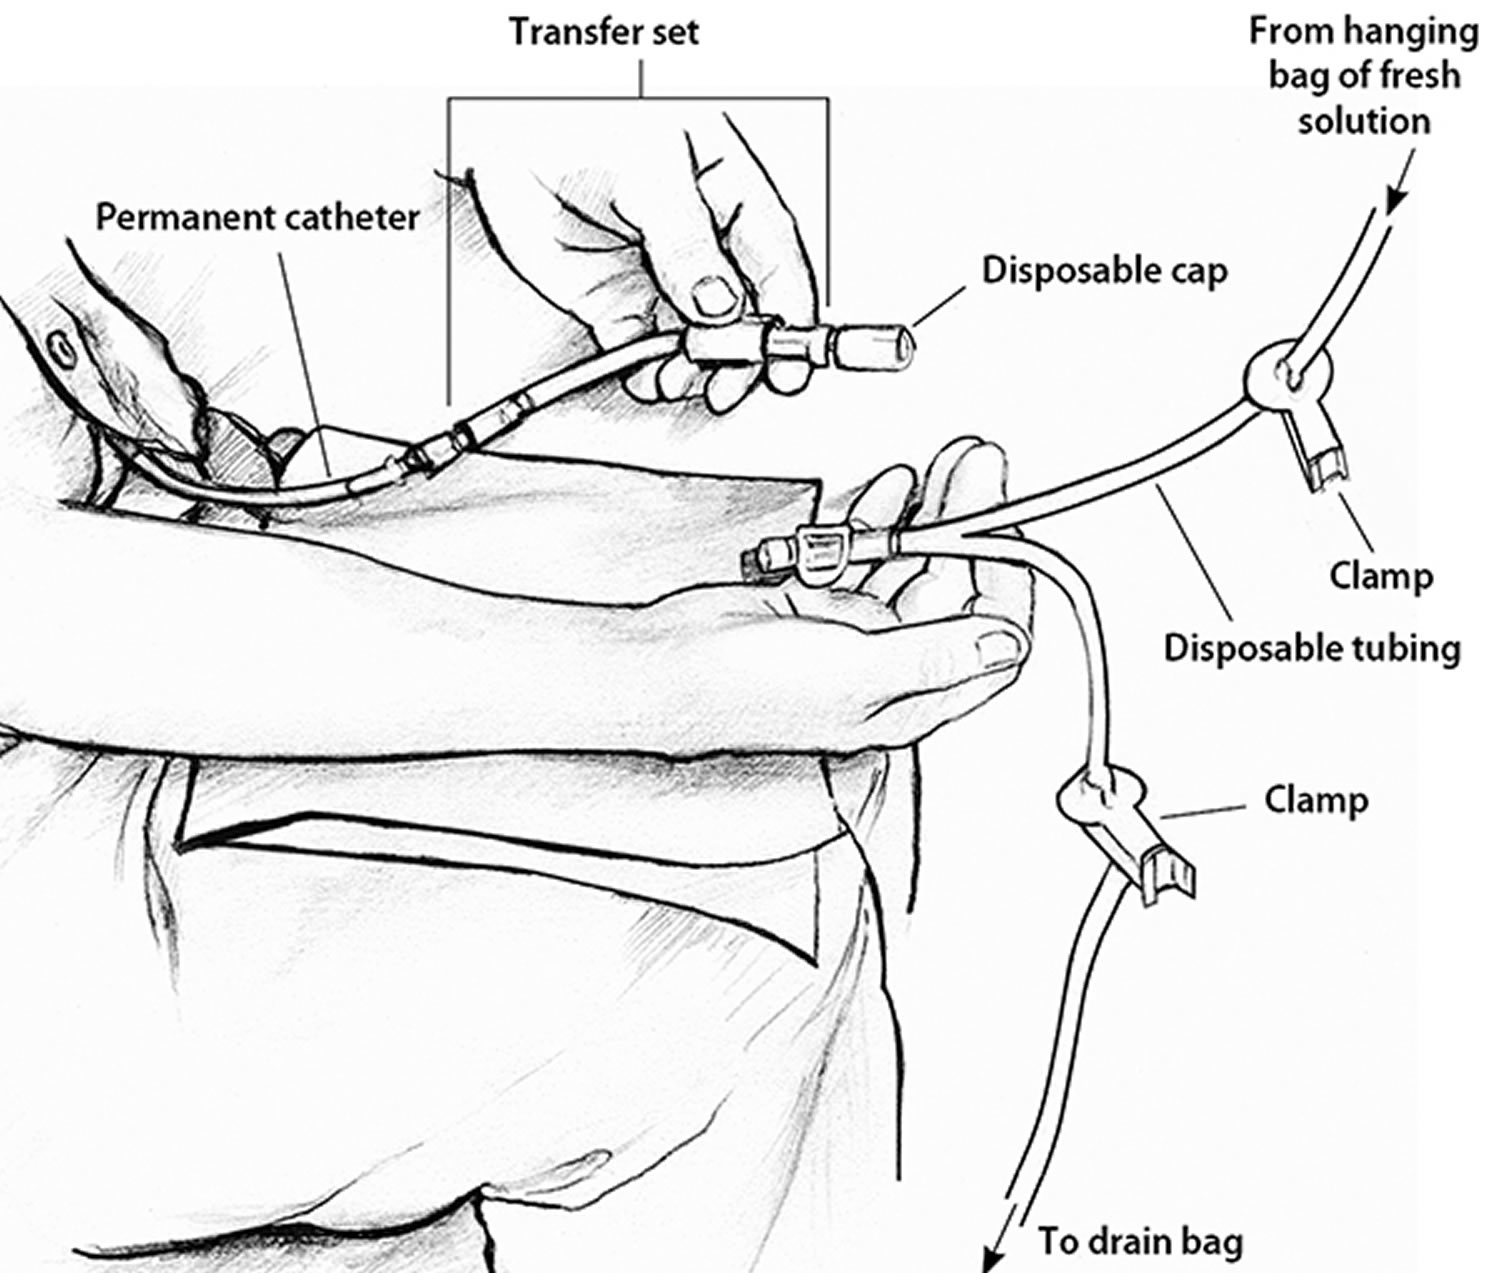 how to connect your catheter to the transfer set to do your peritoneal dialysis